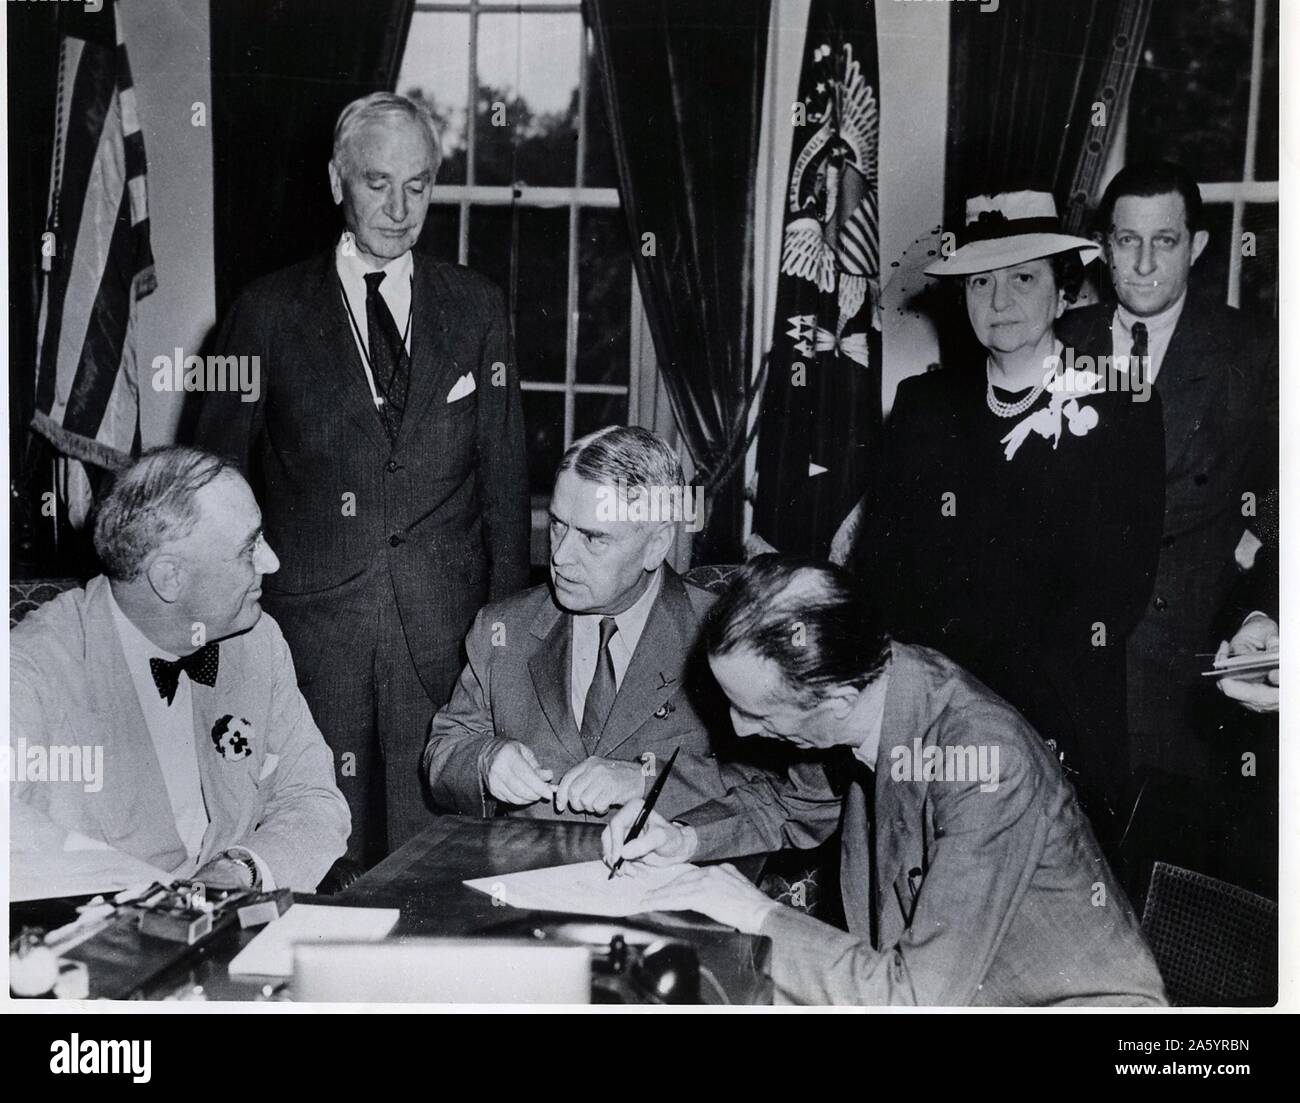 The signing of the Declaration of Philadelphia took place at the White House, Washington DC, on 17 May 1944. Seated, left to right; US President Franklin Delano Roosevelt, Walter Nash, E.J. Phelan. Standing, left to right: US Secretary of State Cordell Hull, US Secretary of Labour Frances Perkins, ILO Assistant Director Lindsay Rogers. Stock Photo